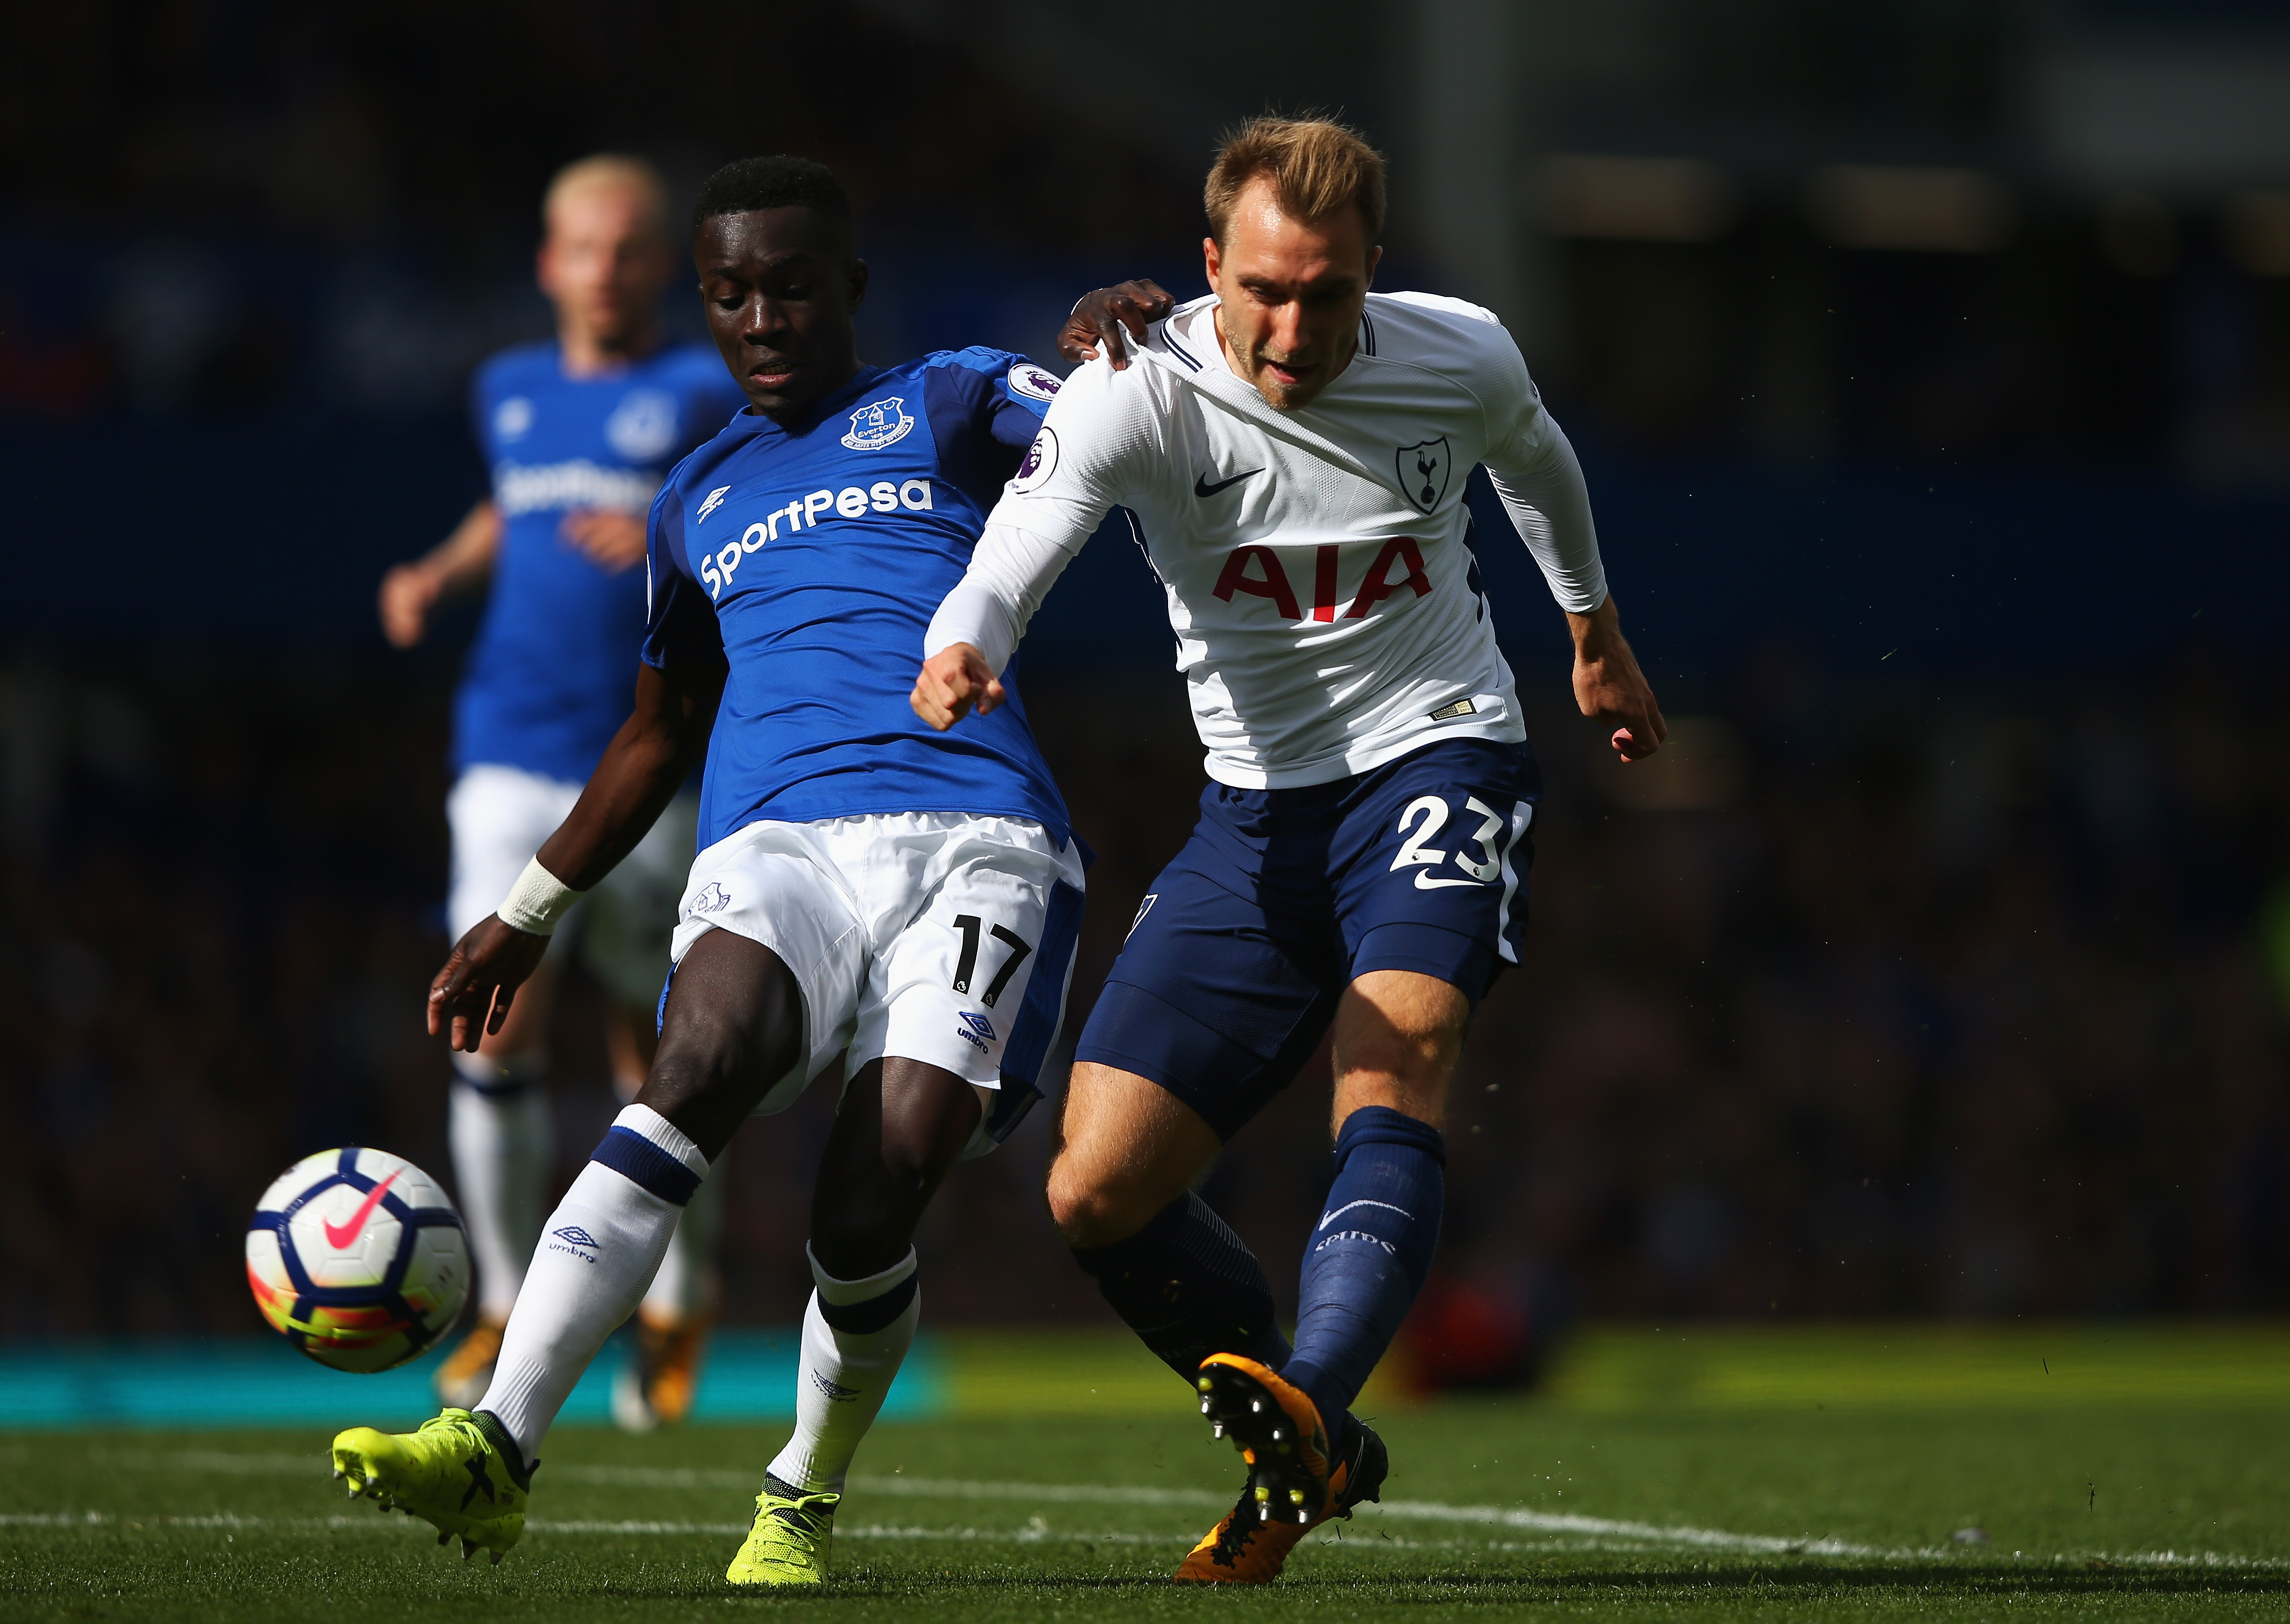 LIVERPOOL, ENGLAND - SEPTEMBER 09:  Christian Eriksen of Tottenham Hotspur shoots while under pressure from Idrissa Gueye of Everton during the Premier League match between Everton and Tottenham Hotspur at Goodison Park on September 9, 2017 in Liverpool, England.  (Photo by Alex Livesey/Getty Images)